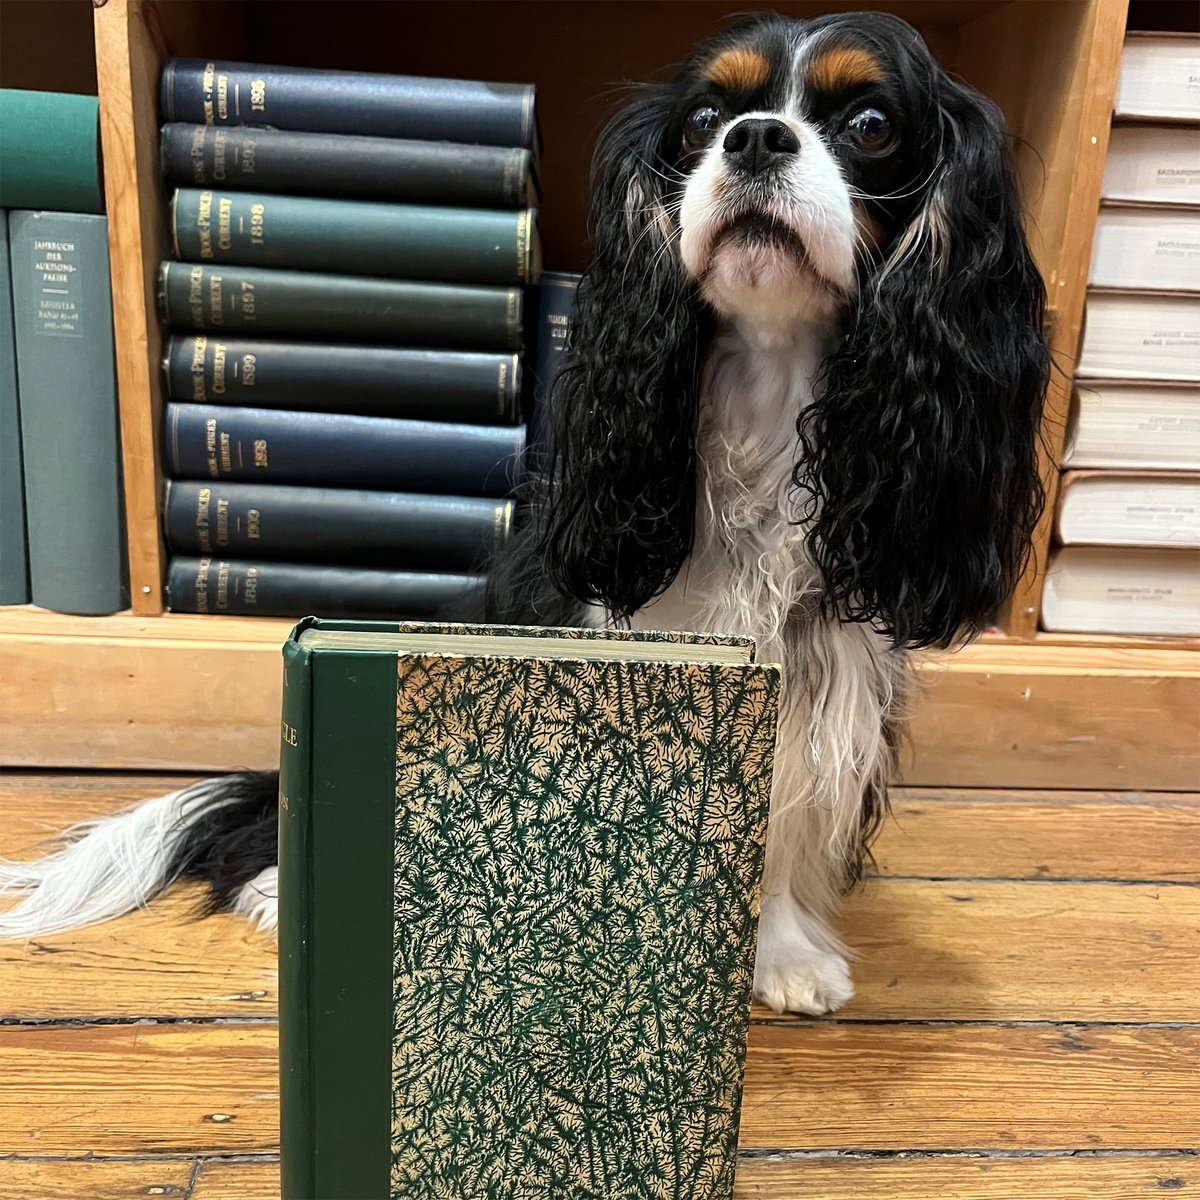 This #woofwednesday, Ellie is celebrating national #maritimeday with H. M. Tomlinson's THE SEA & THE JUNGLE! 
Get your very own copy here- oakknoll.com/pages/books/13…

#oakknollbooks #oakknollpress #booksaboutbooks #books #maritime #maritimebooks #voyage #sea #travel #england #brazil